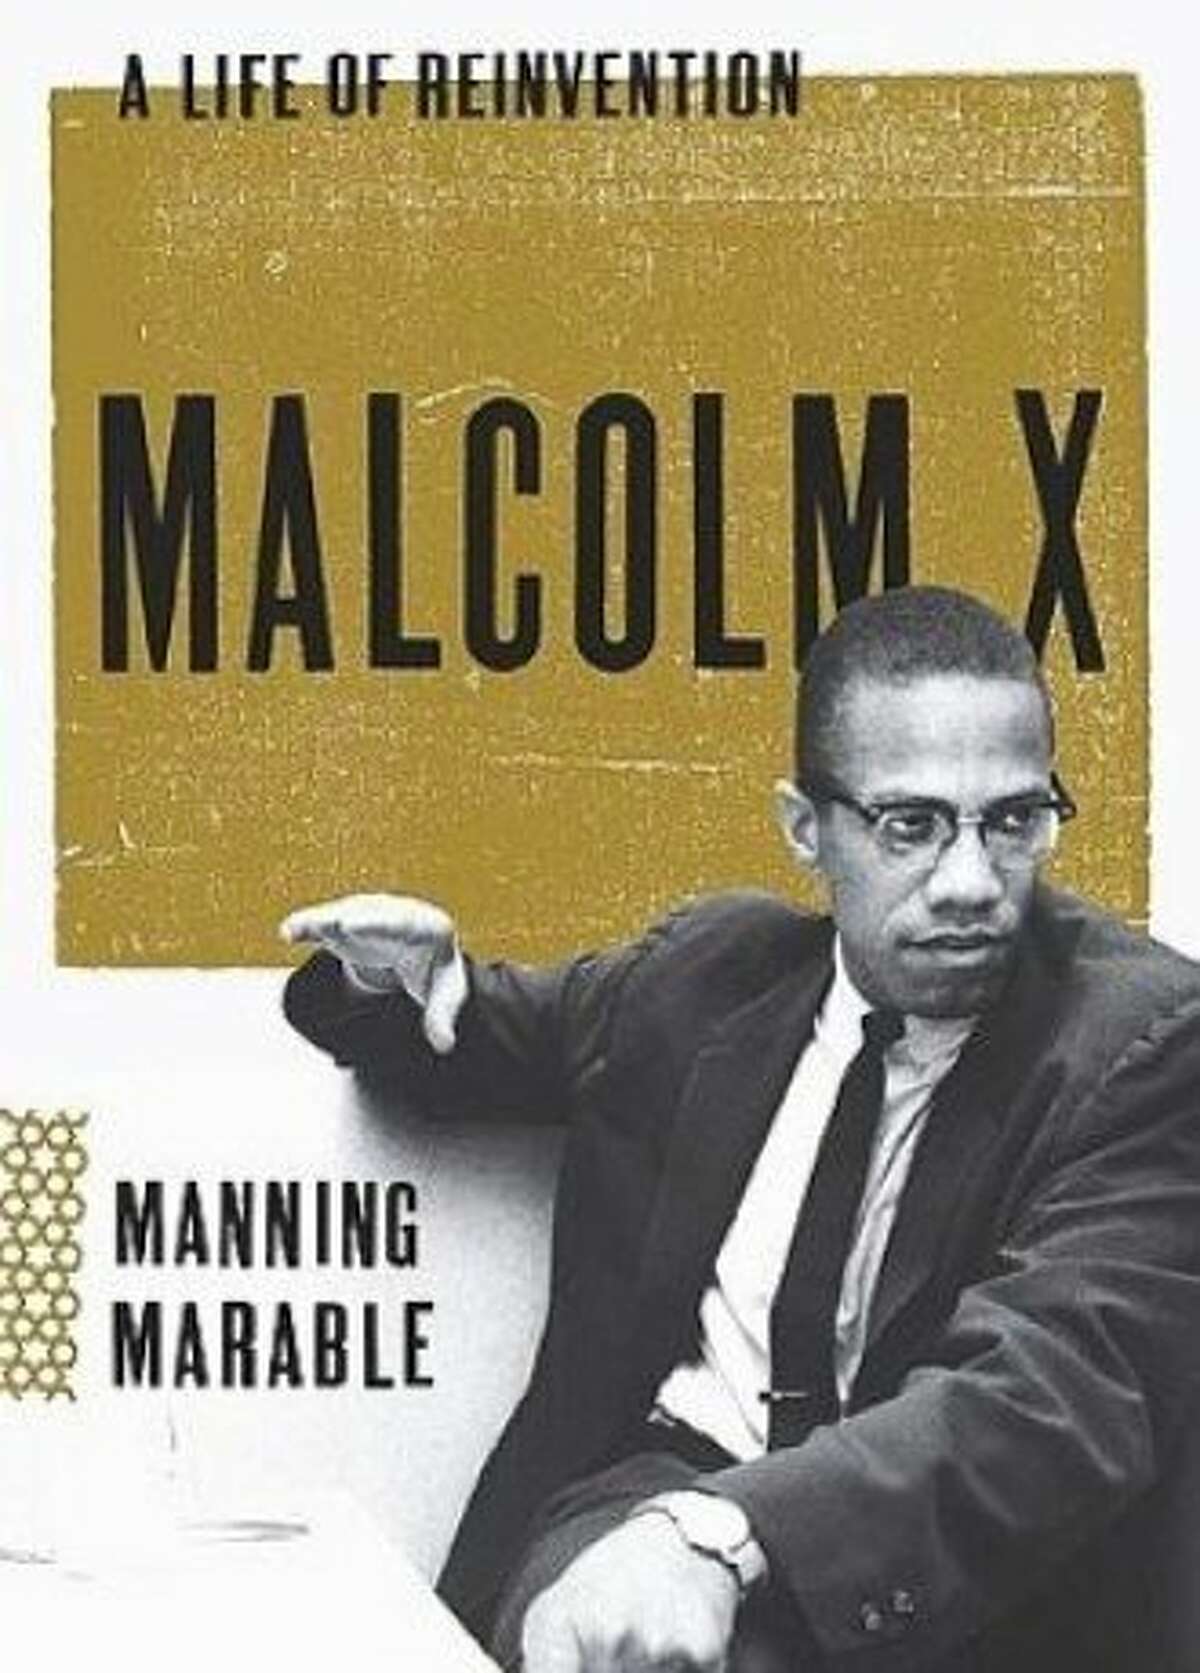 Malcolm X: A Life of Reinvention, by Manning Marable